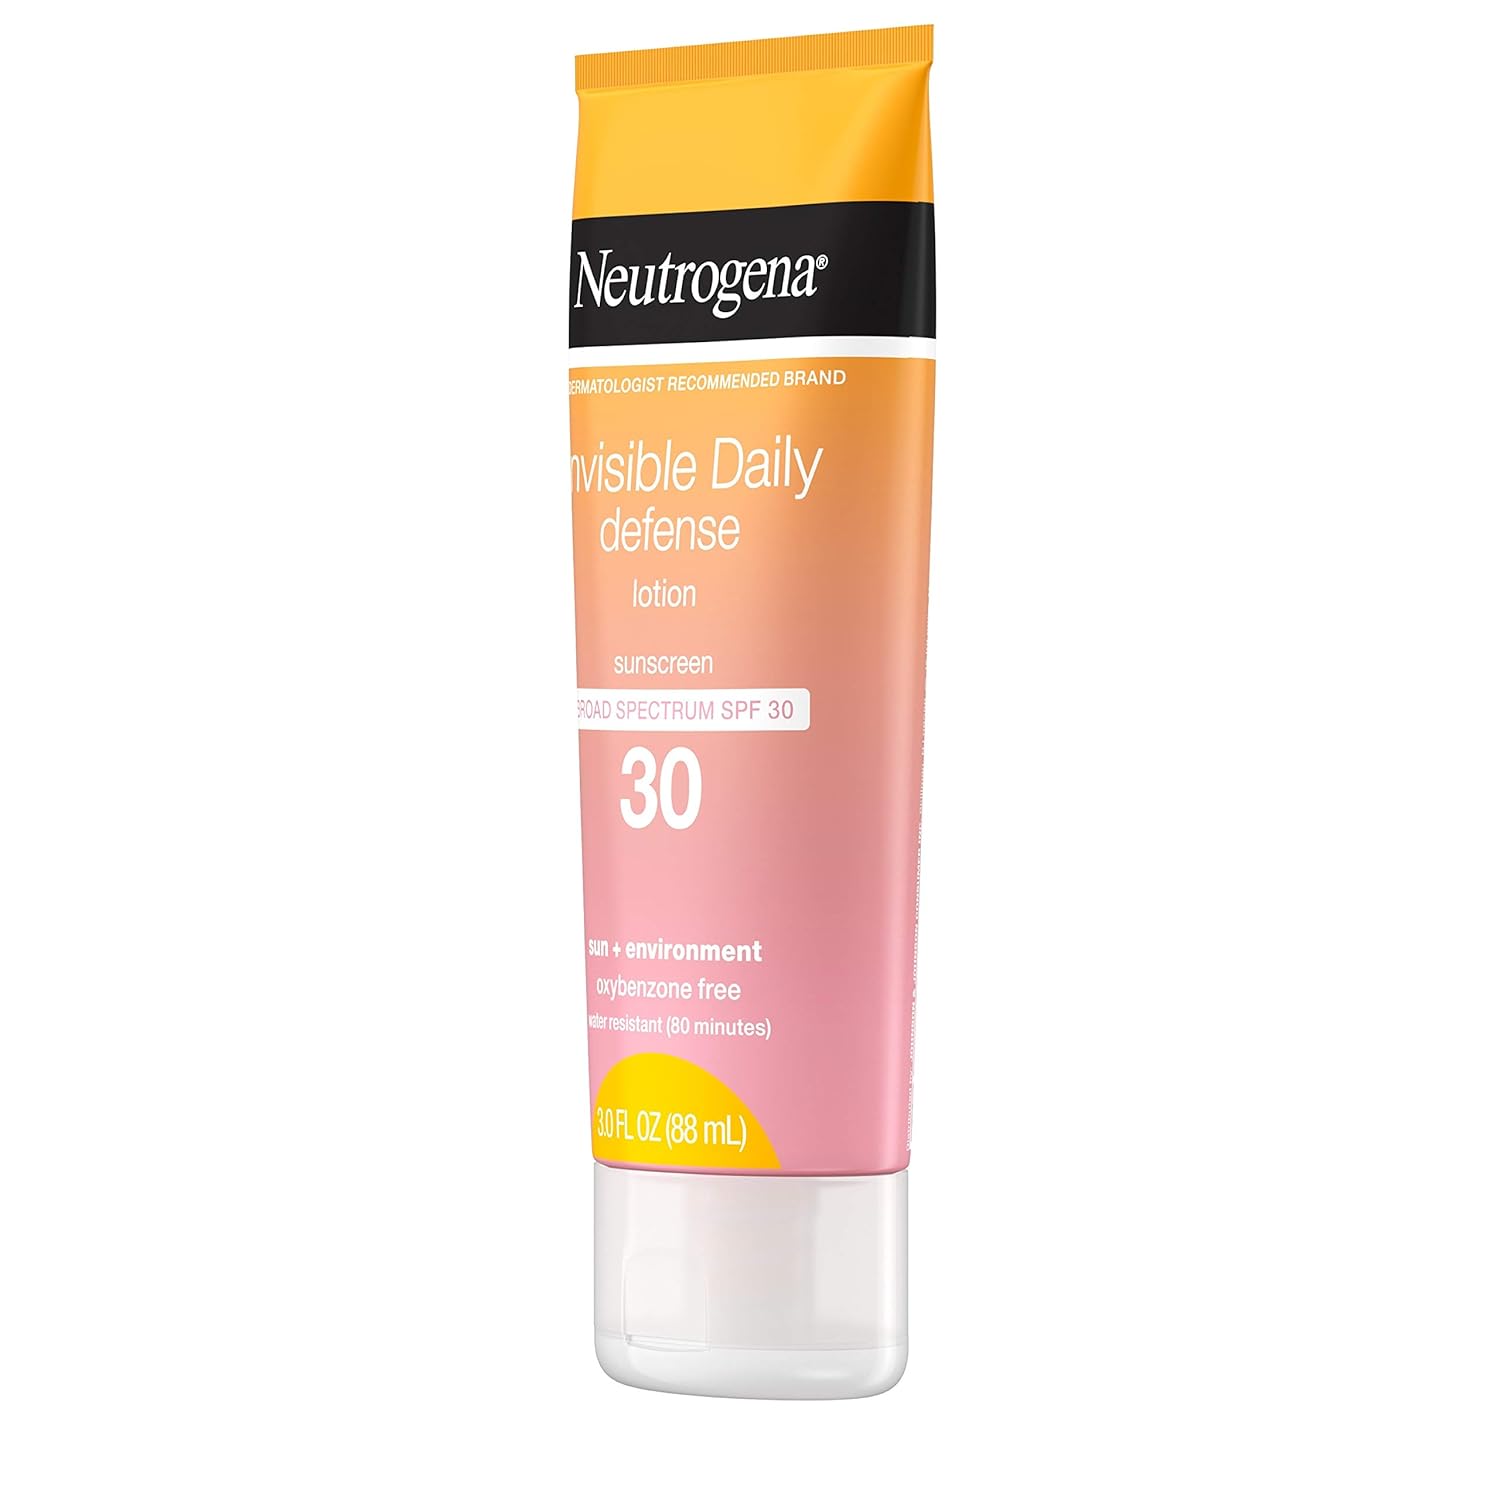 Neutrogena Invisible Daily Defense Sunscreen Lotion, Broad Spectrum SPF 30, Oxybenzone-Free & Water-Resistant, Sun & Environmental Aggressor Protection, Antioxidant Complex, 3.0 fl. oz : Beauty & Personal Care